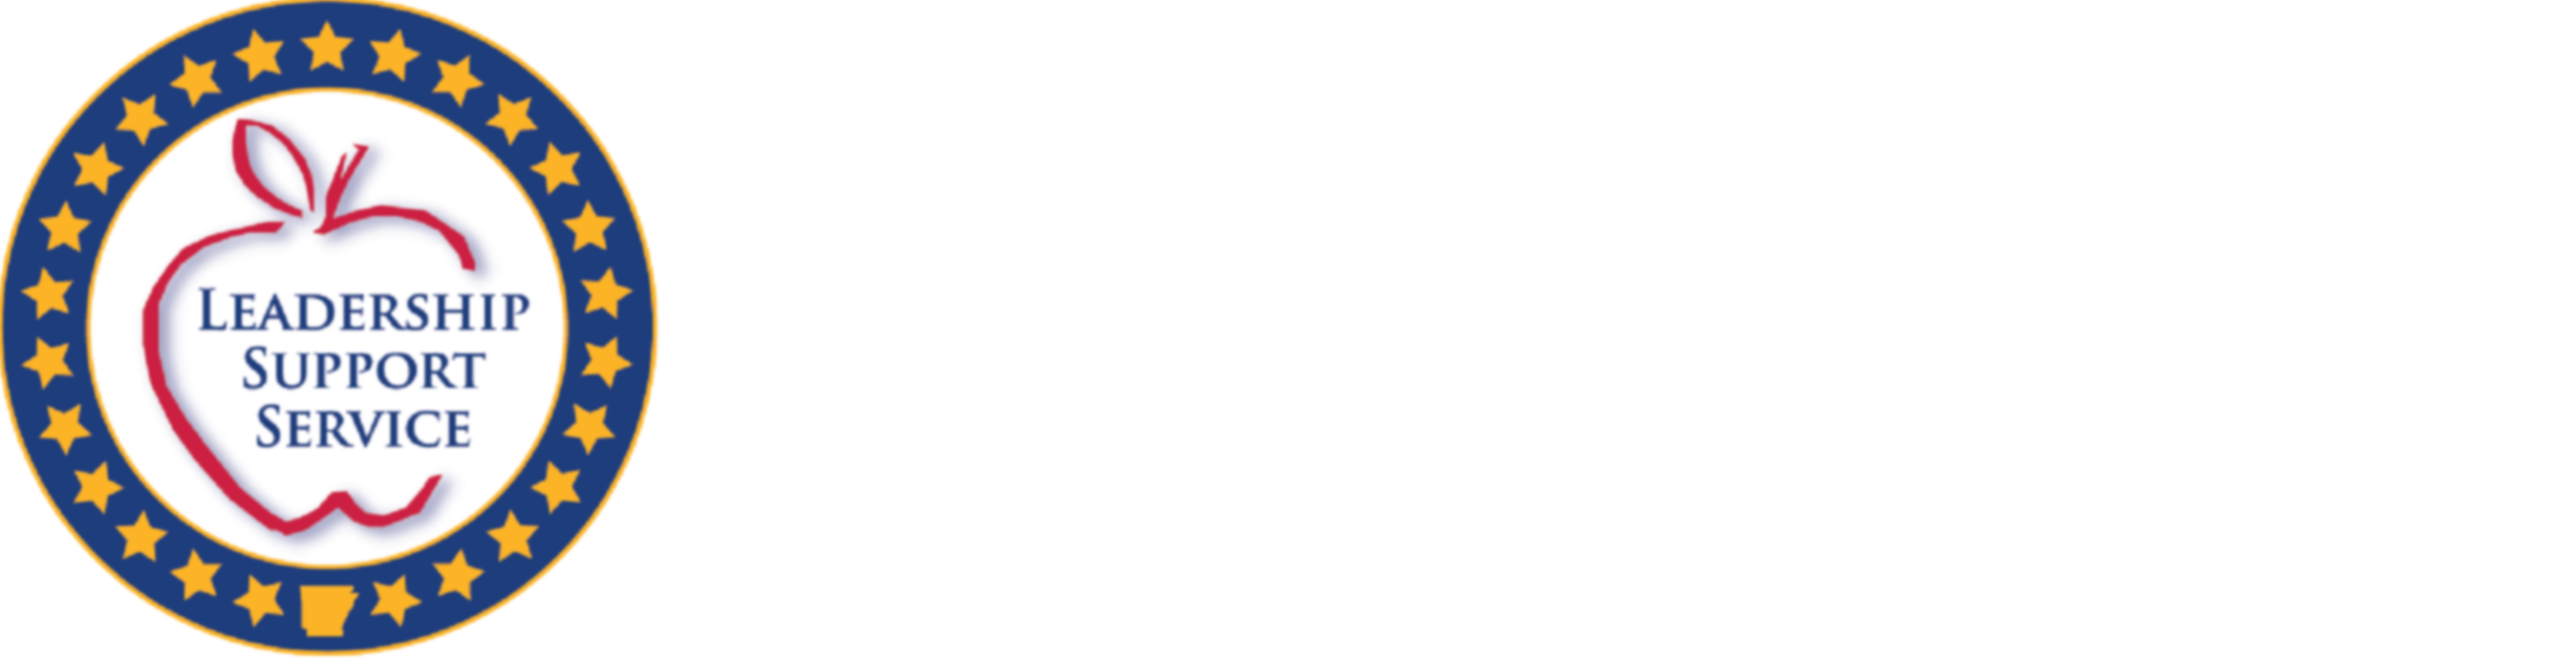 State required info